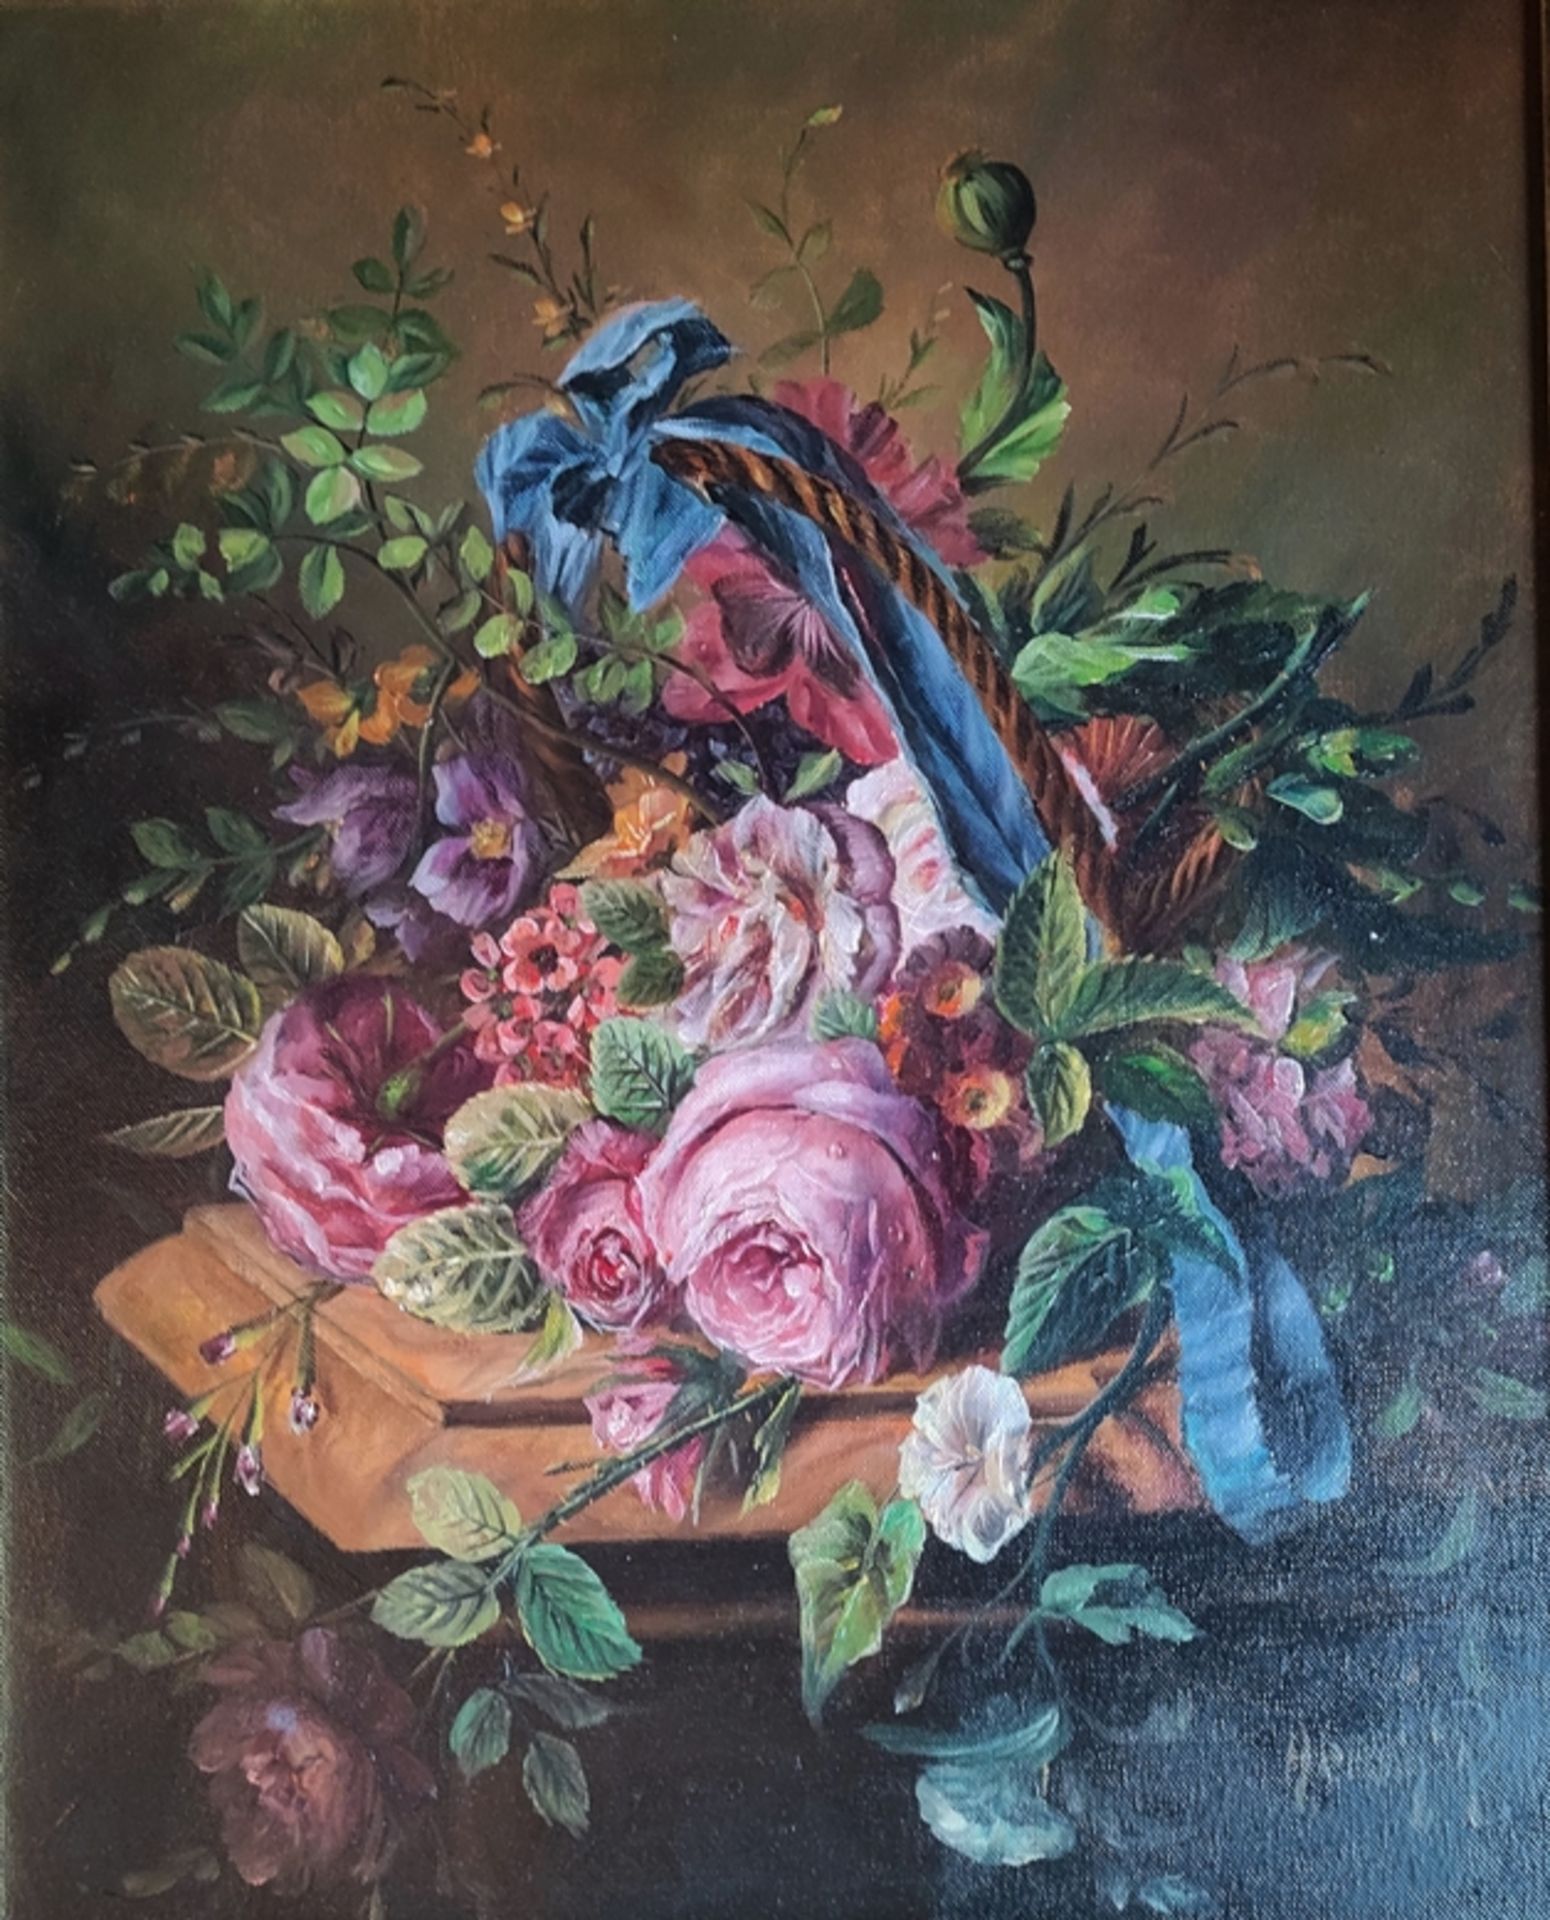 Radtke, Herdin (1943) "Floral Still Life", fine polychrome depiction with roses, signed lower right